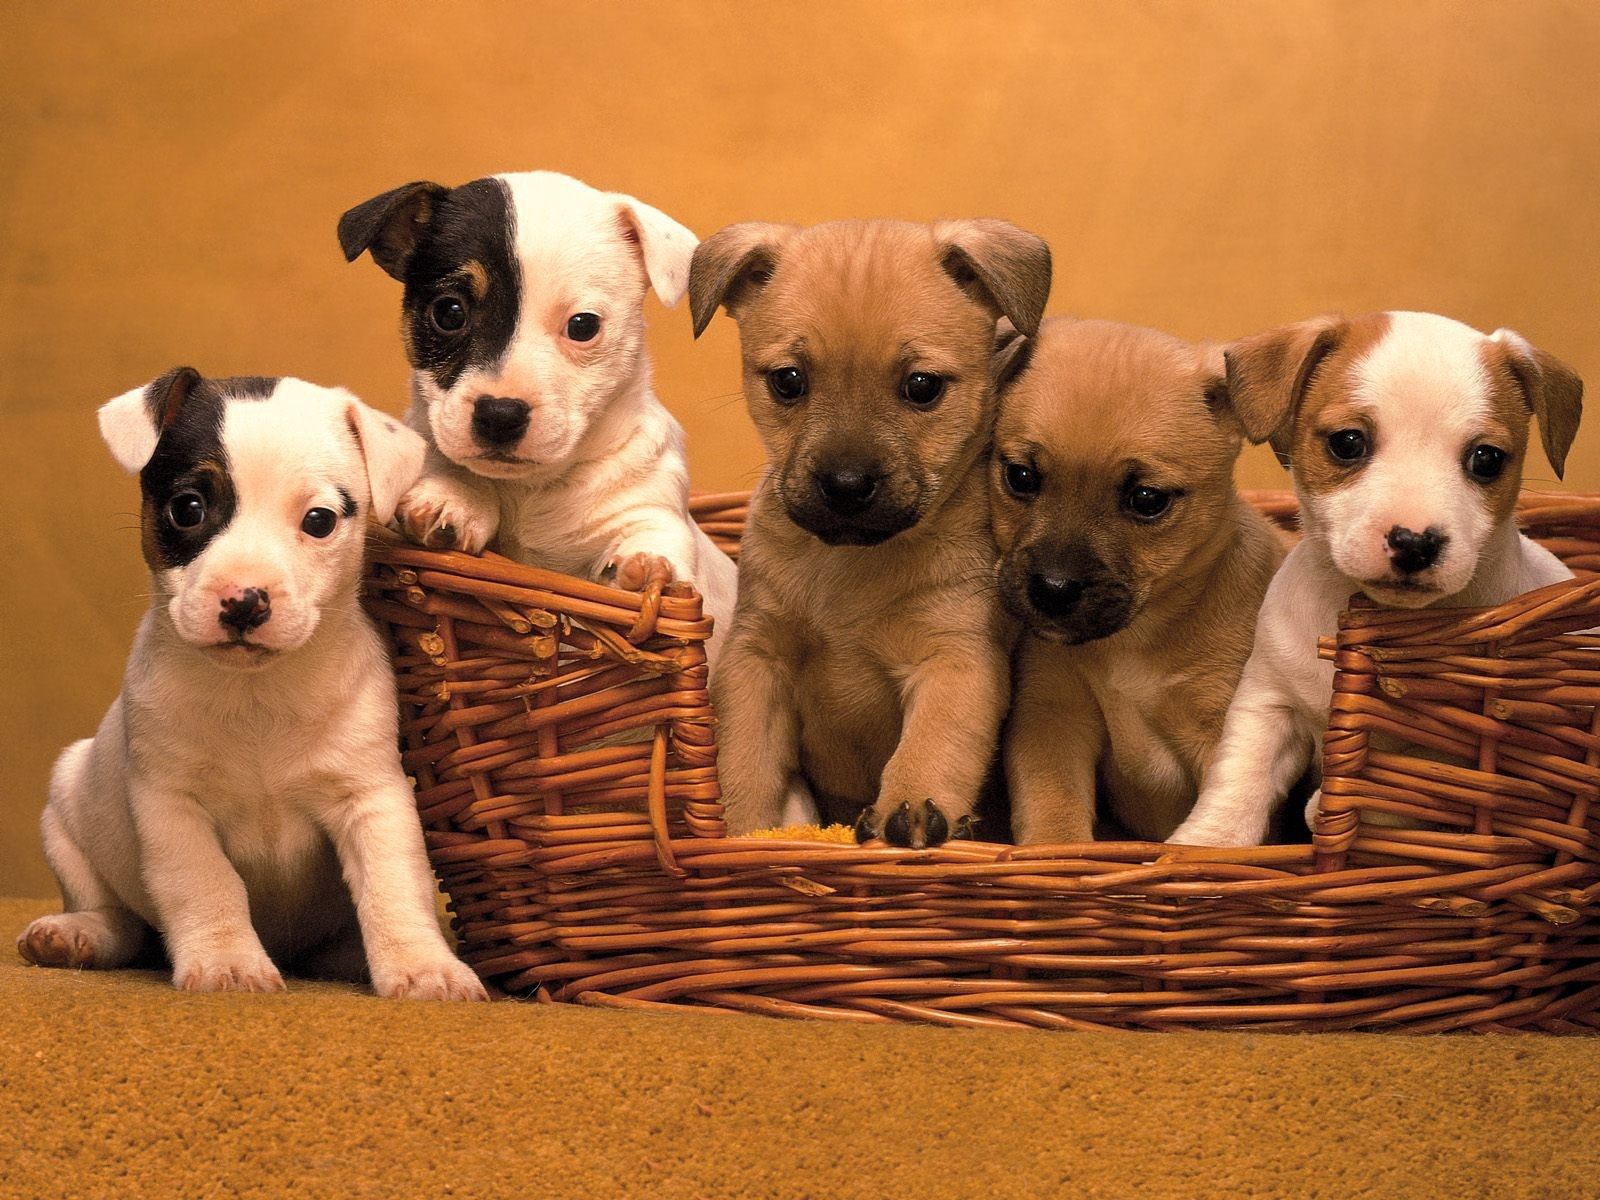 animals, puppies, muzzle, basket, lots of, multitude Full HD